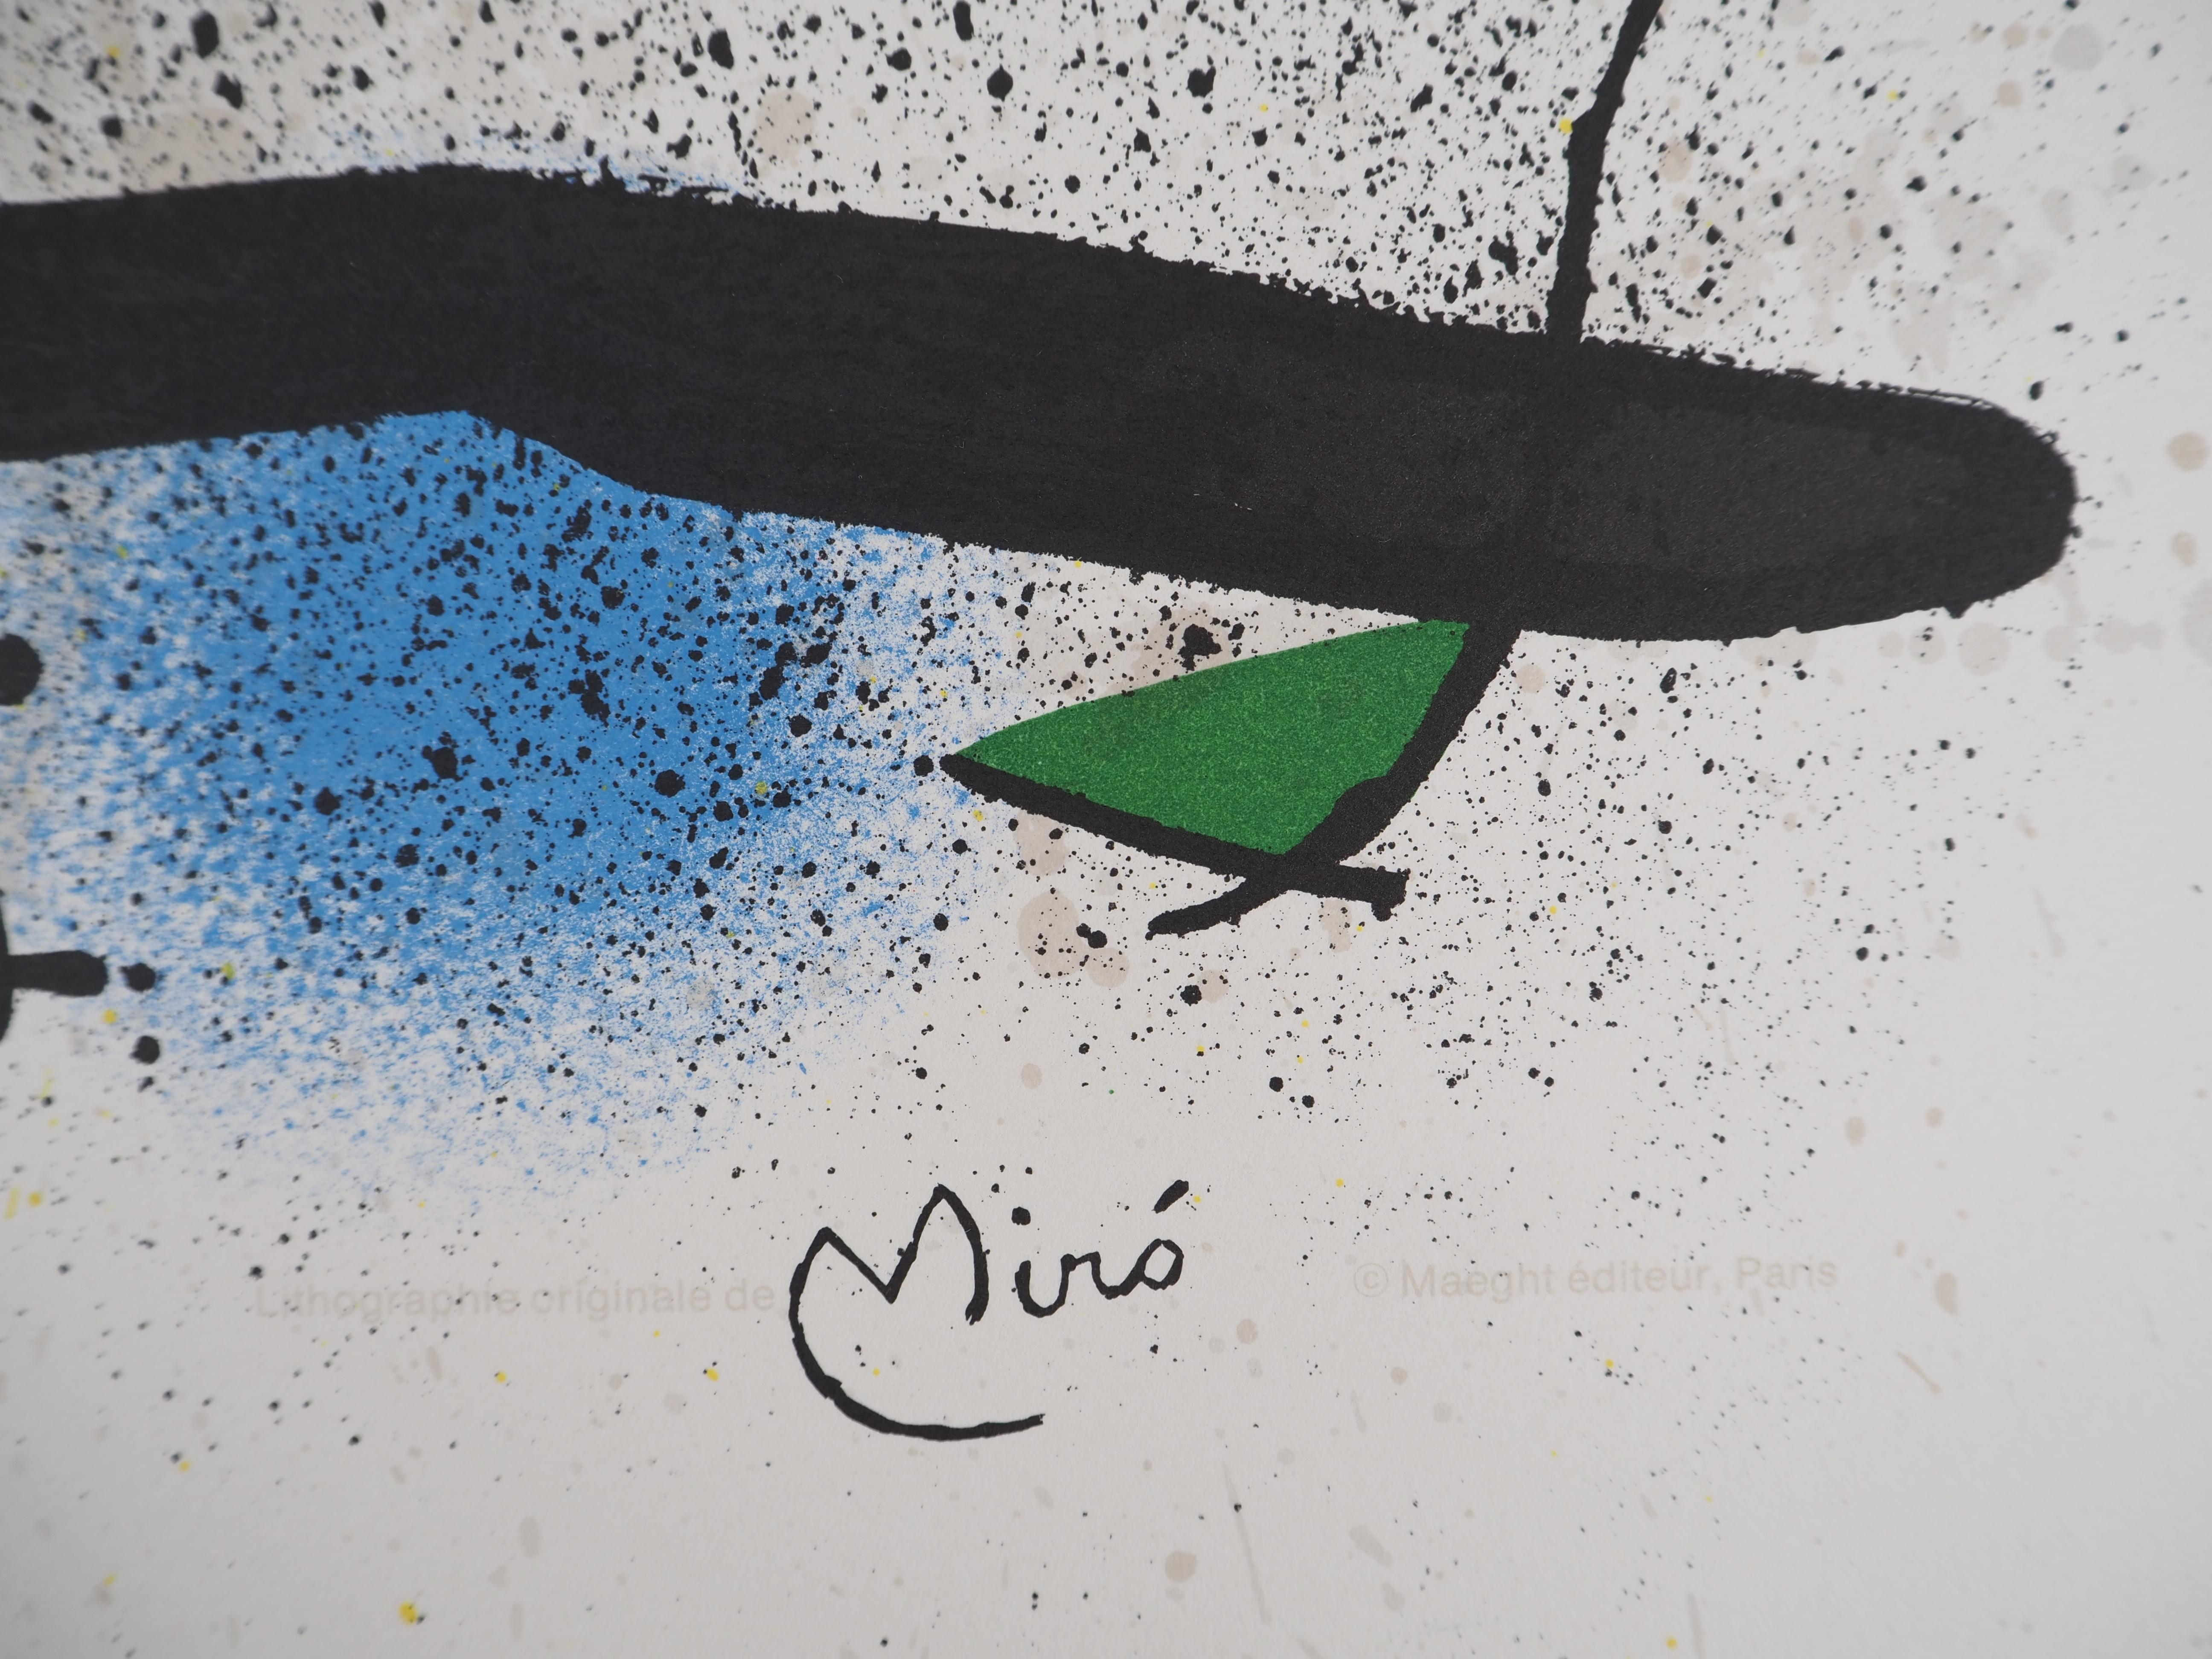 Surrealist Garden - Original Lithograph, Signed in the Plate - Mourlot 950 - Print by Joan Miró